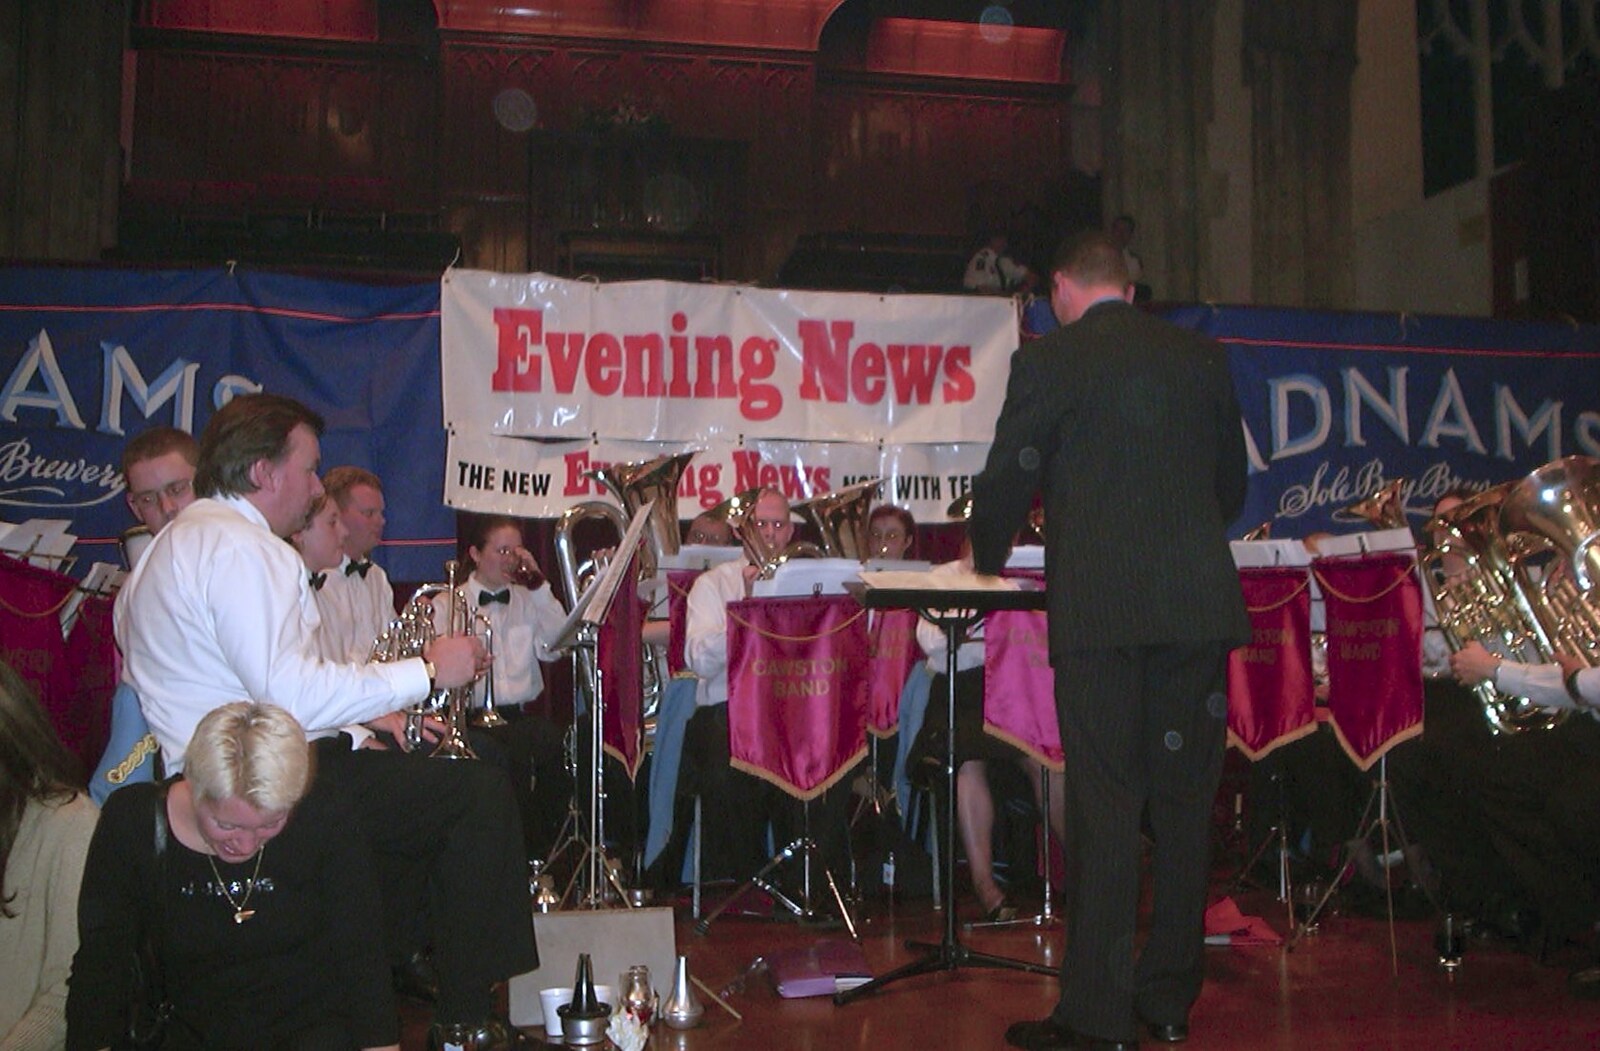 The Cawston Silver Band from The Norwich Beer Festival, St. Andrew's Hall, Norwich - 24th October 2001